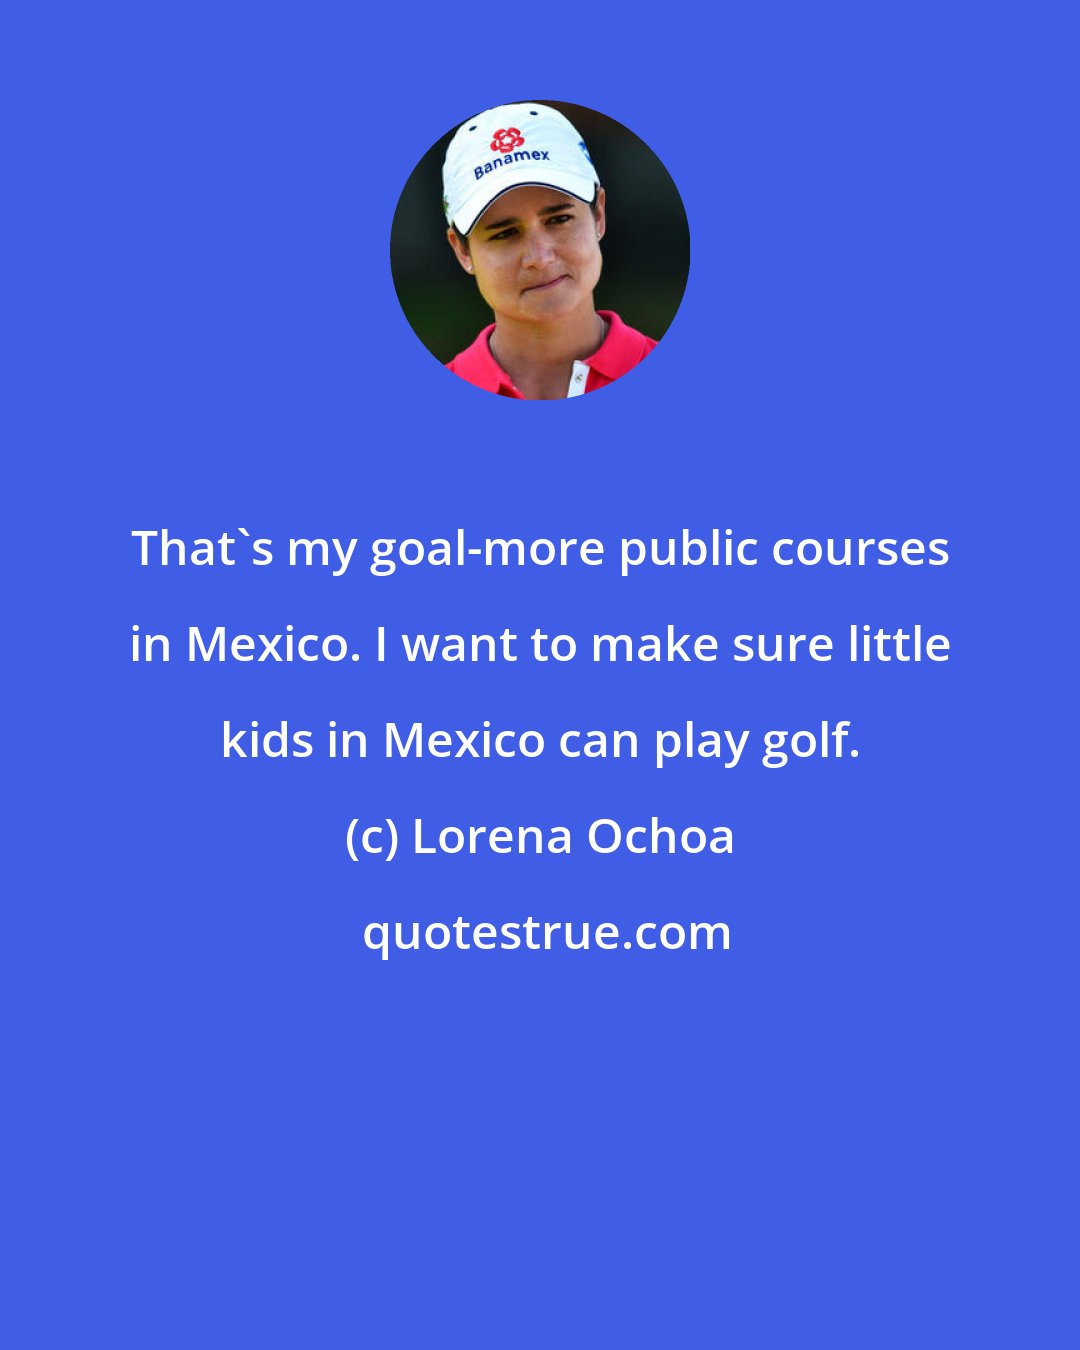 Lorena Ochoa: That's my goal-more public courses in Mexico. I want to make sure little kids in Mexico can play golf.